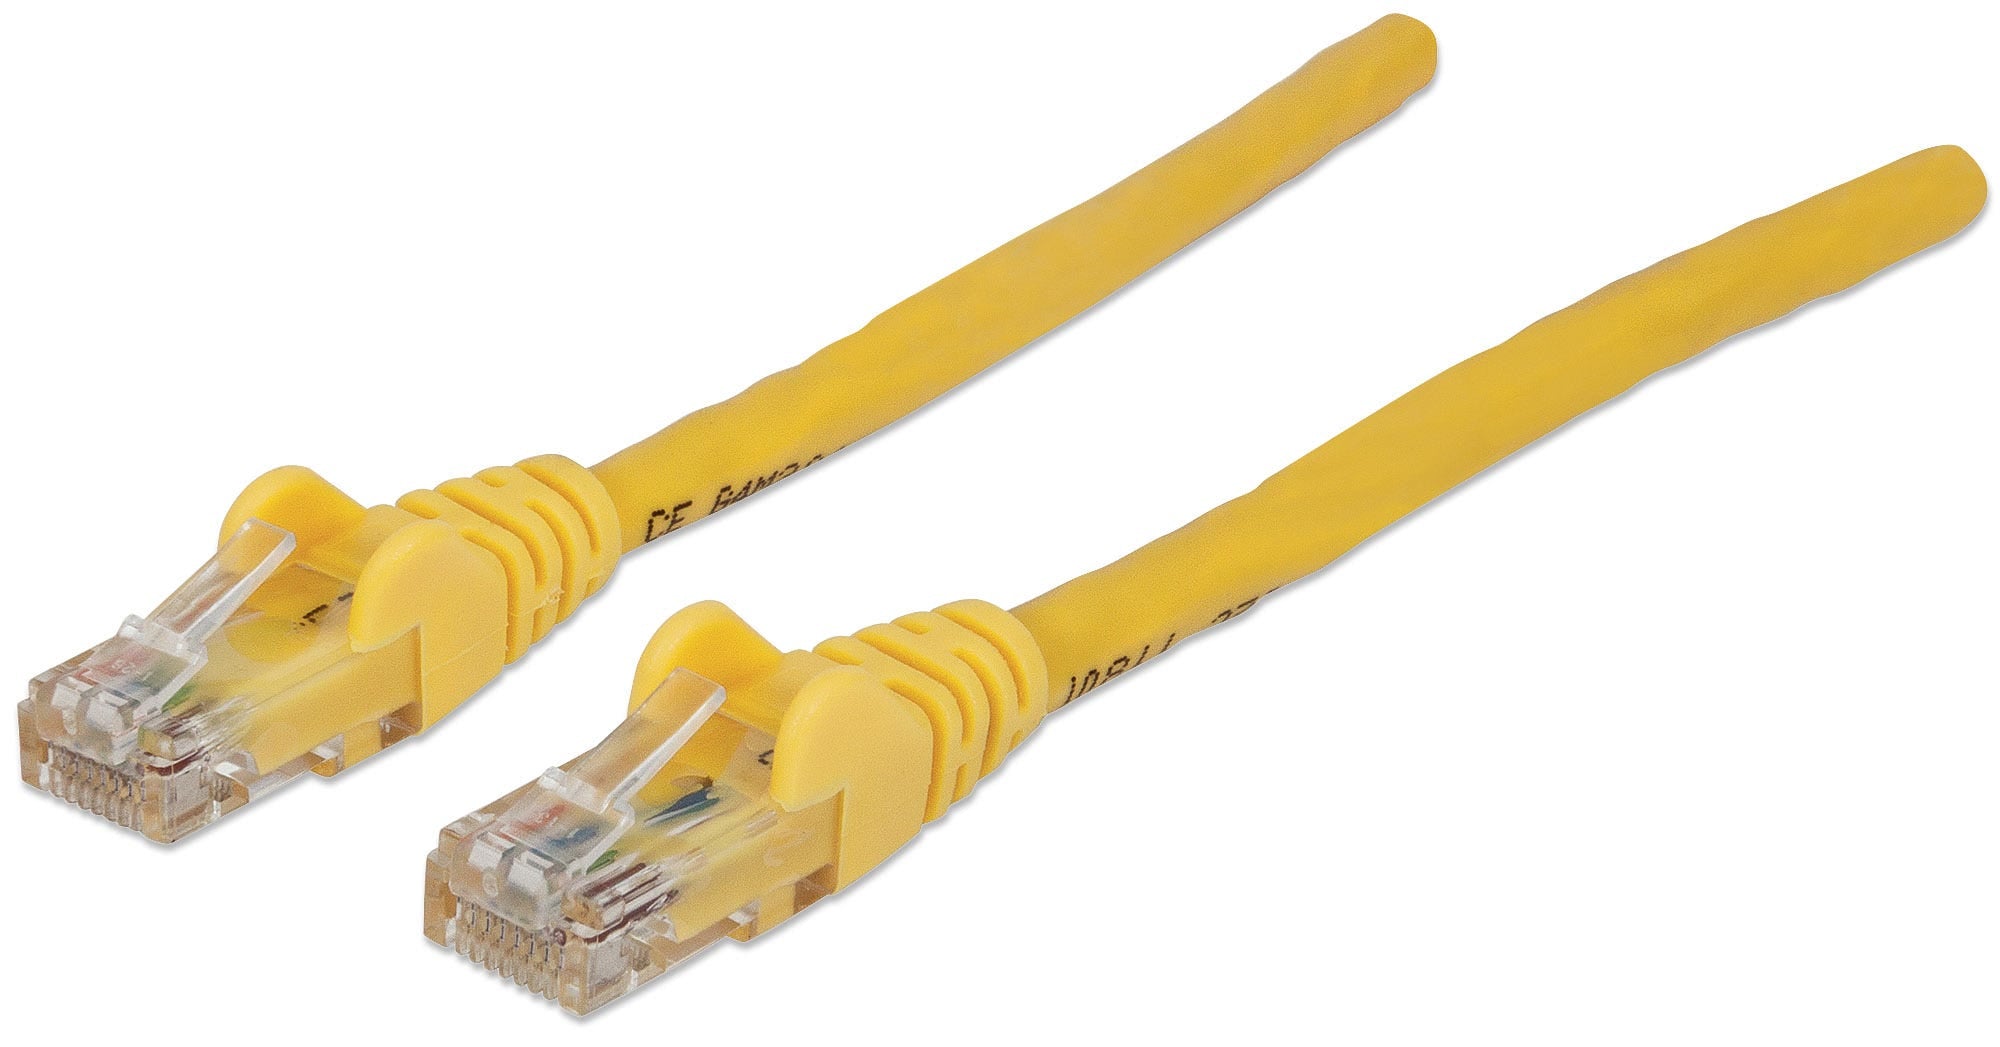 Intellinet Network Patch Cable, Cat6, 1.5m, Yellow, CCA, U/UTP, PVC, RJ45, Gold Plated Contacts, Snagless, Booted, Lifetime Warranty, Polybag